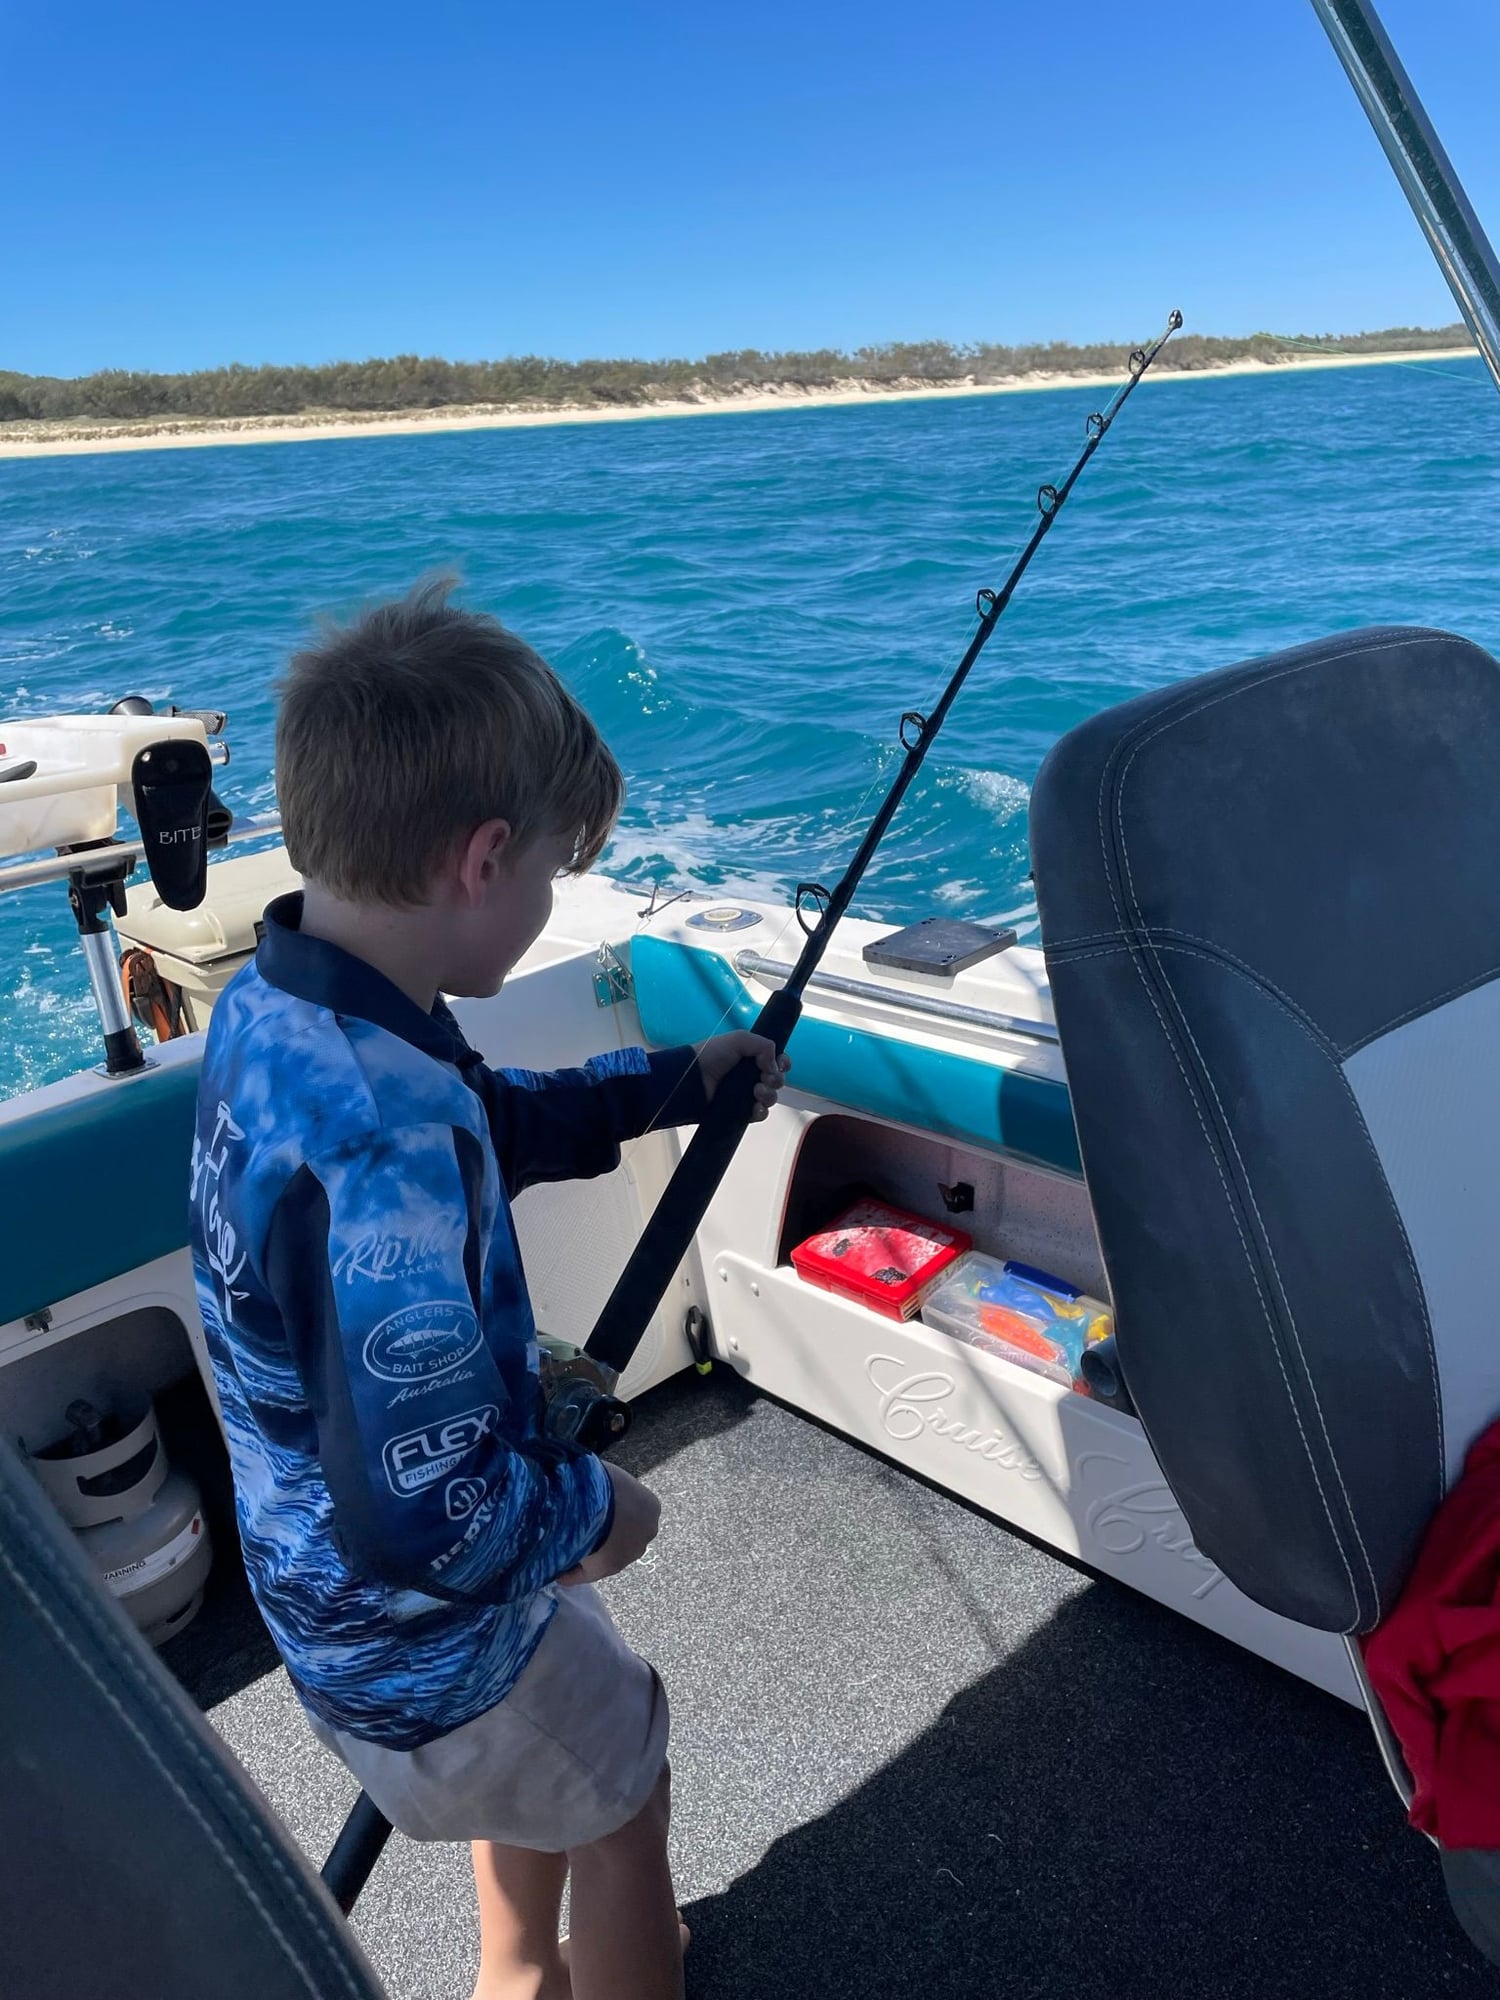 Best offshore/nearshore rod for small child - The Hull Truth